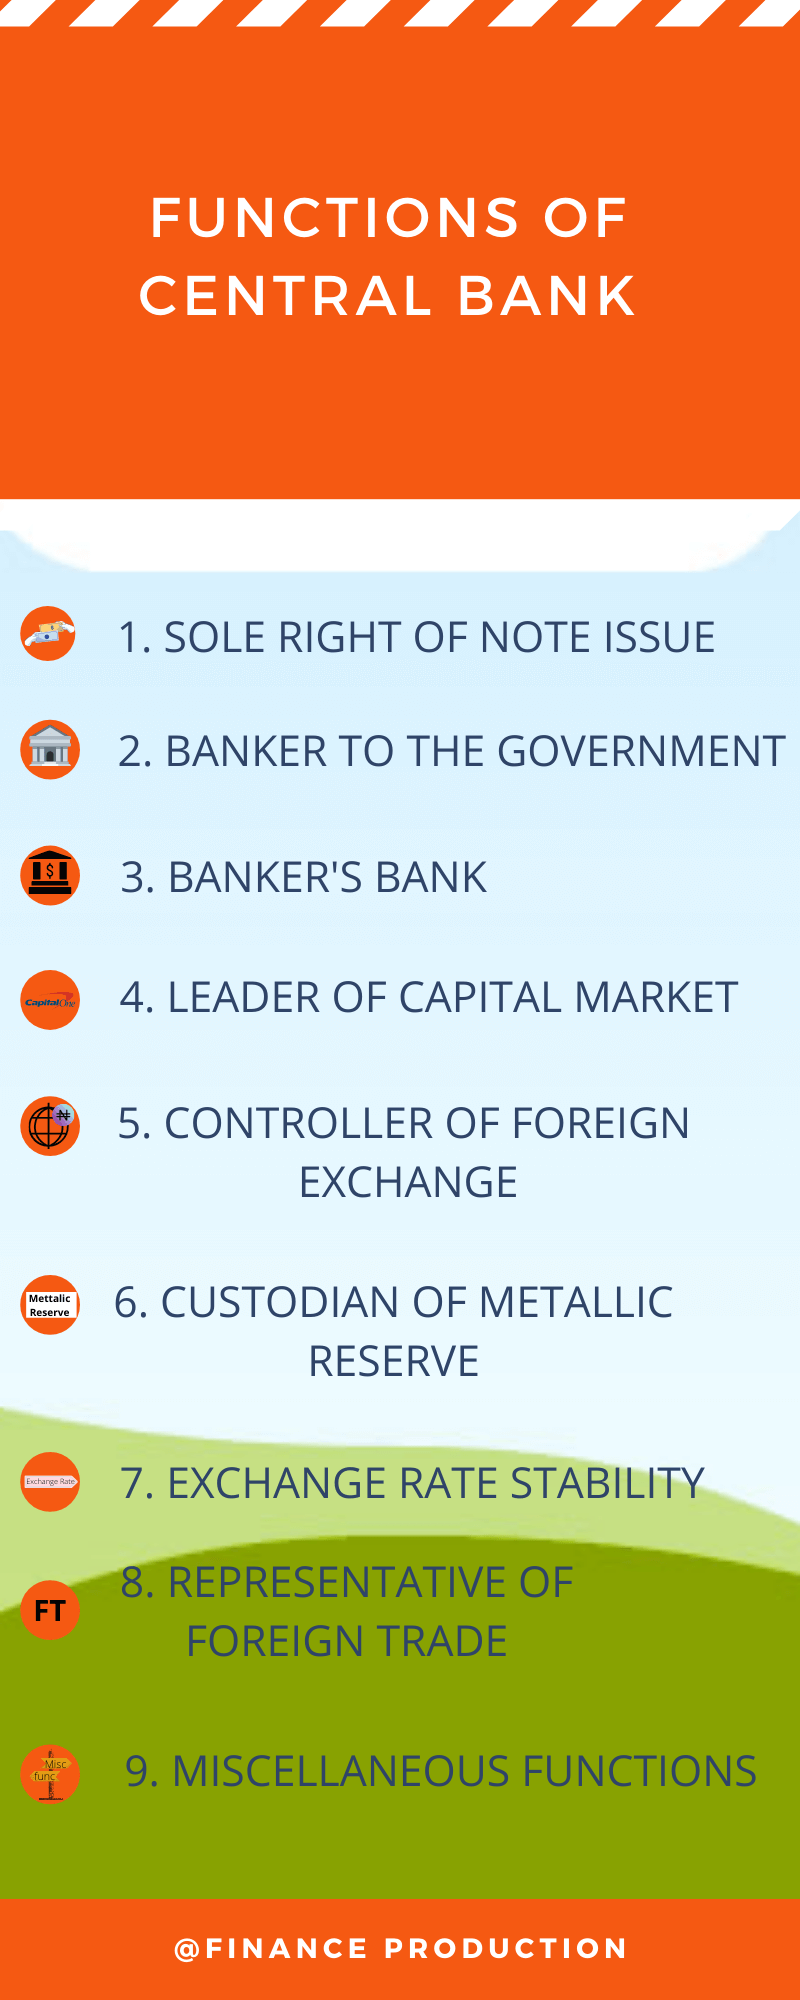 Functions of central bank